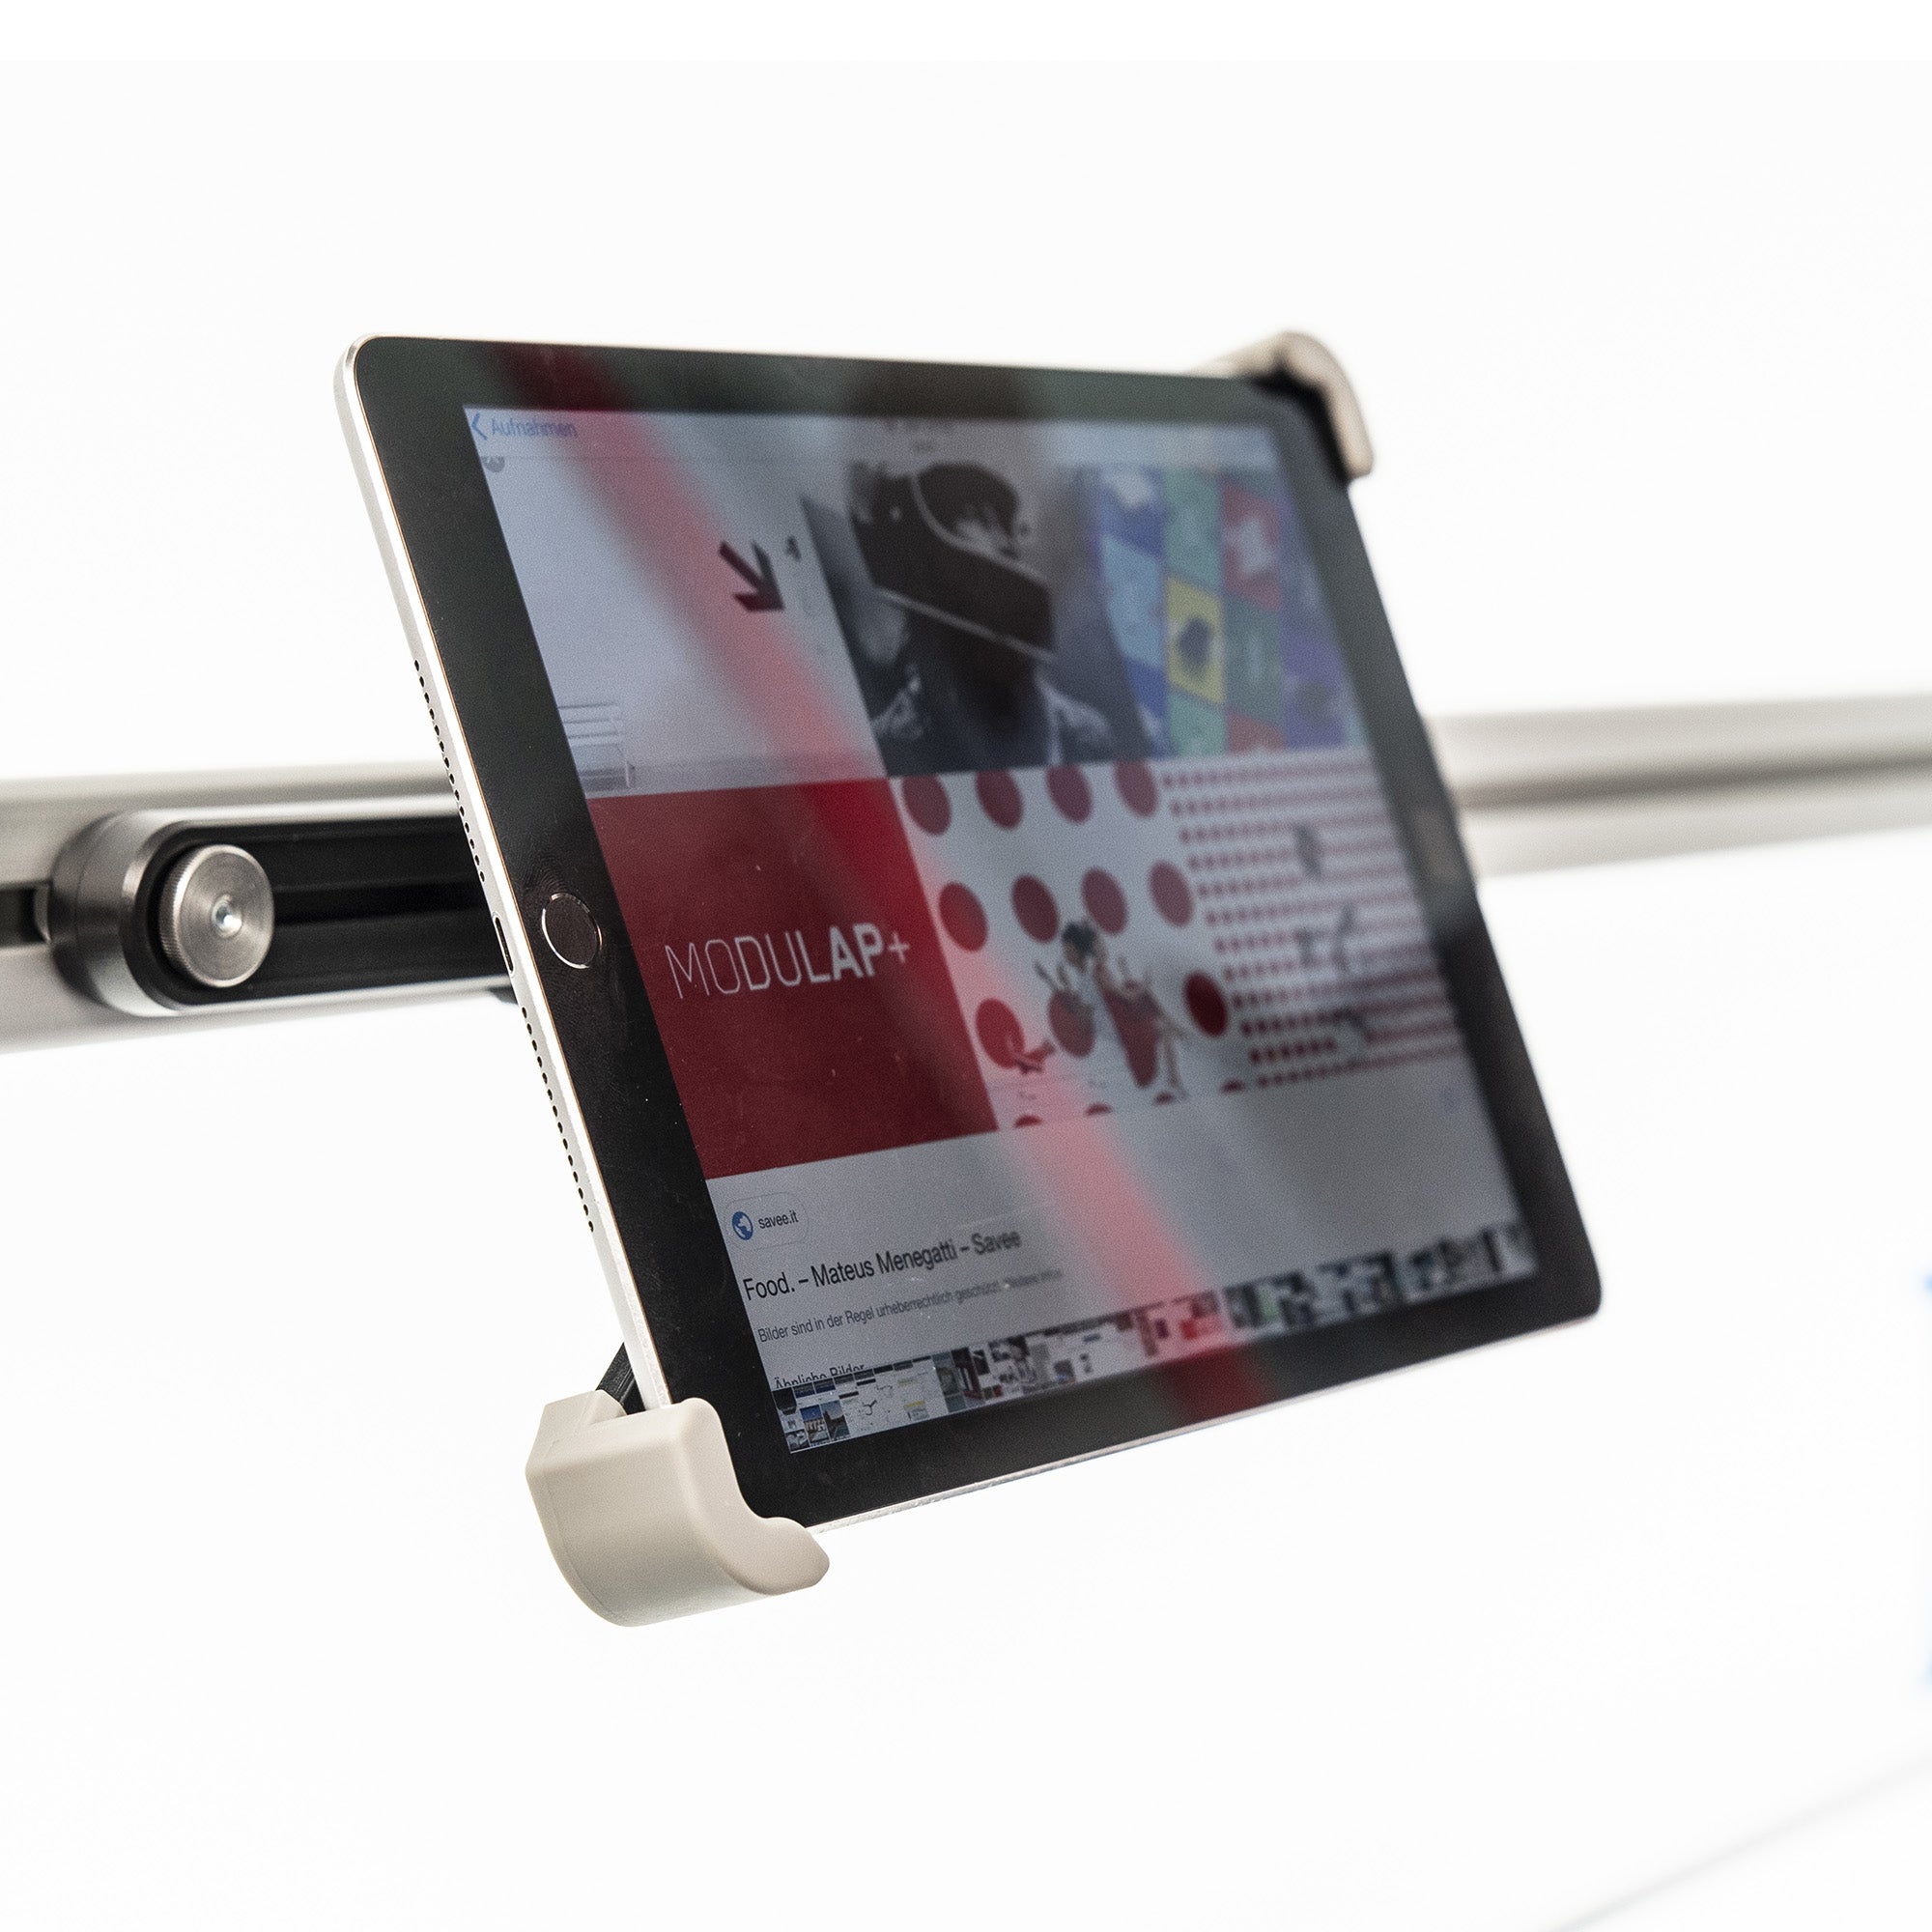 TABLET HALTER MULTI – MODULAP Systems GmbH & Co. KG